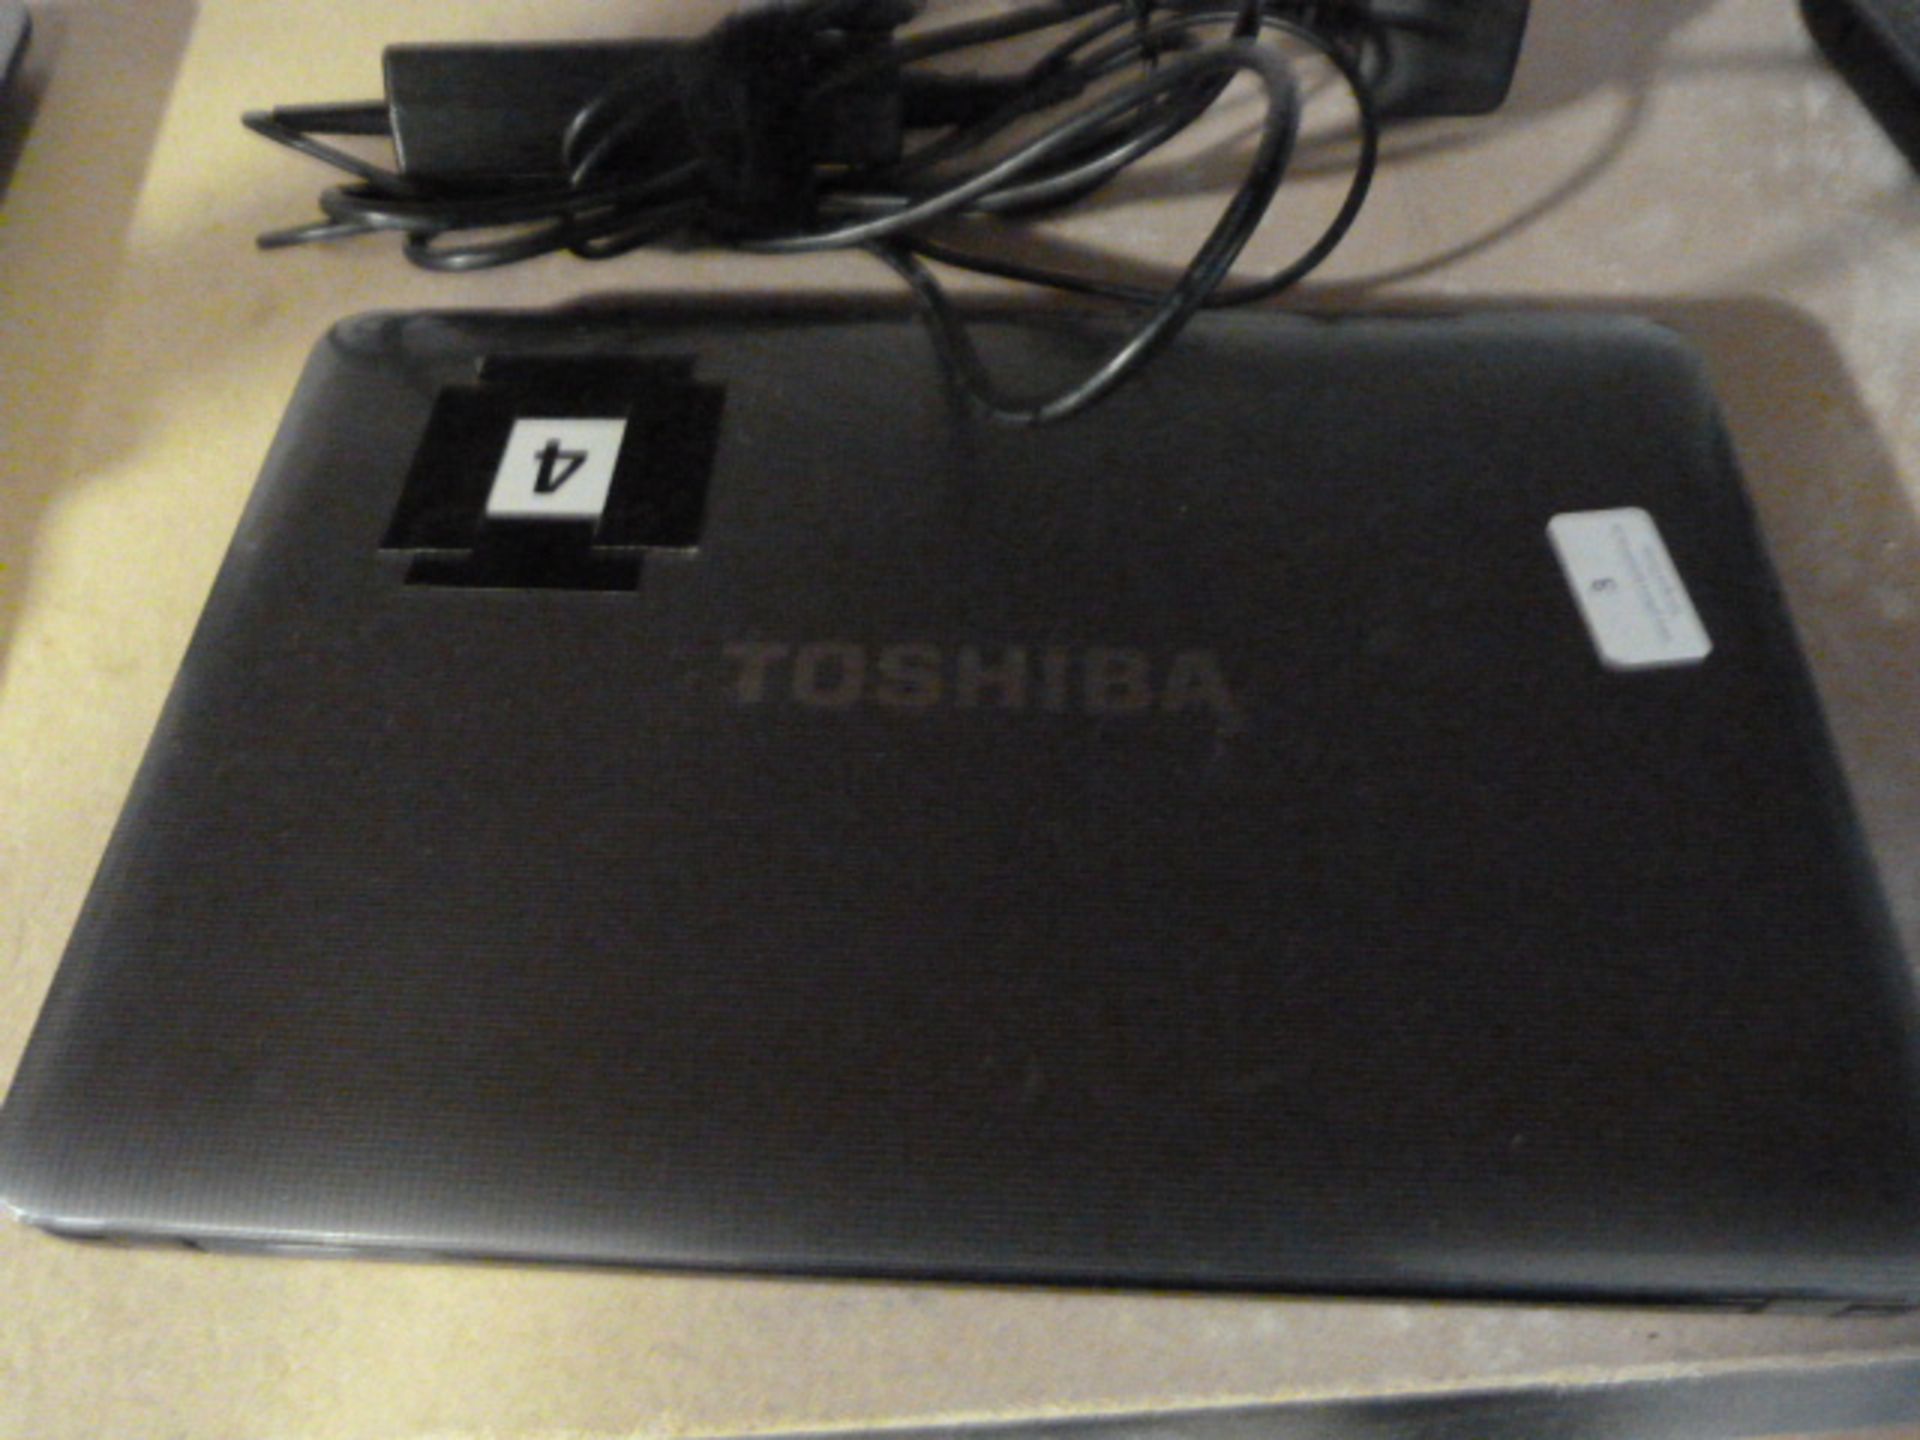 *Toshiba Laptop Computer with Charger (HDD Removed)